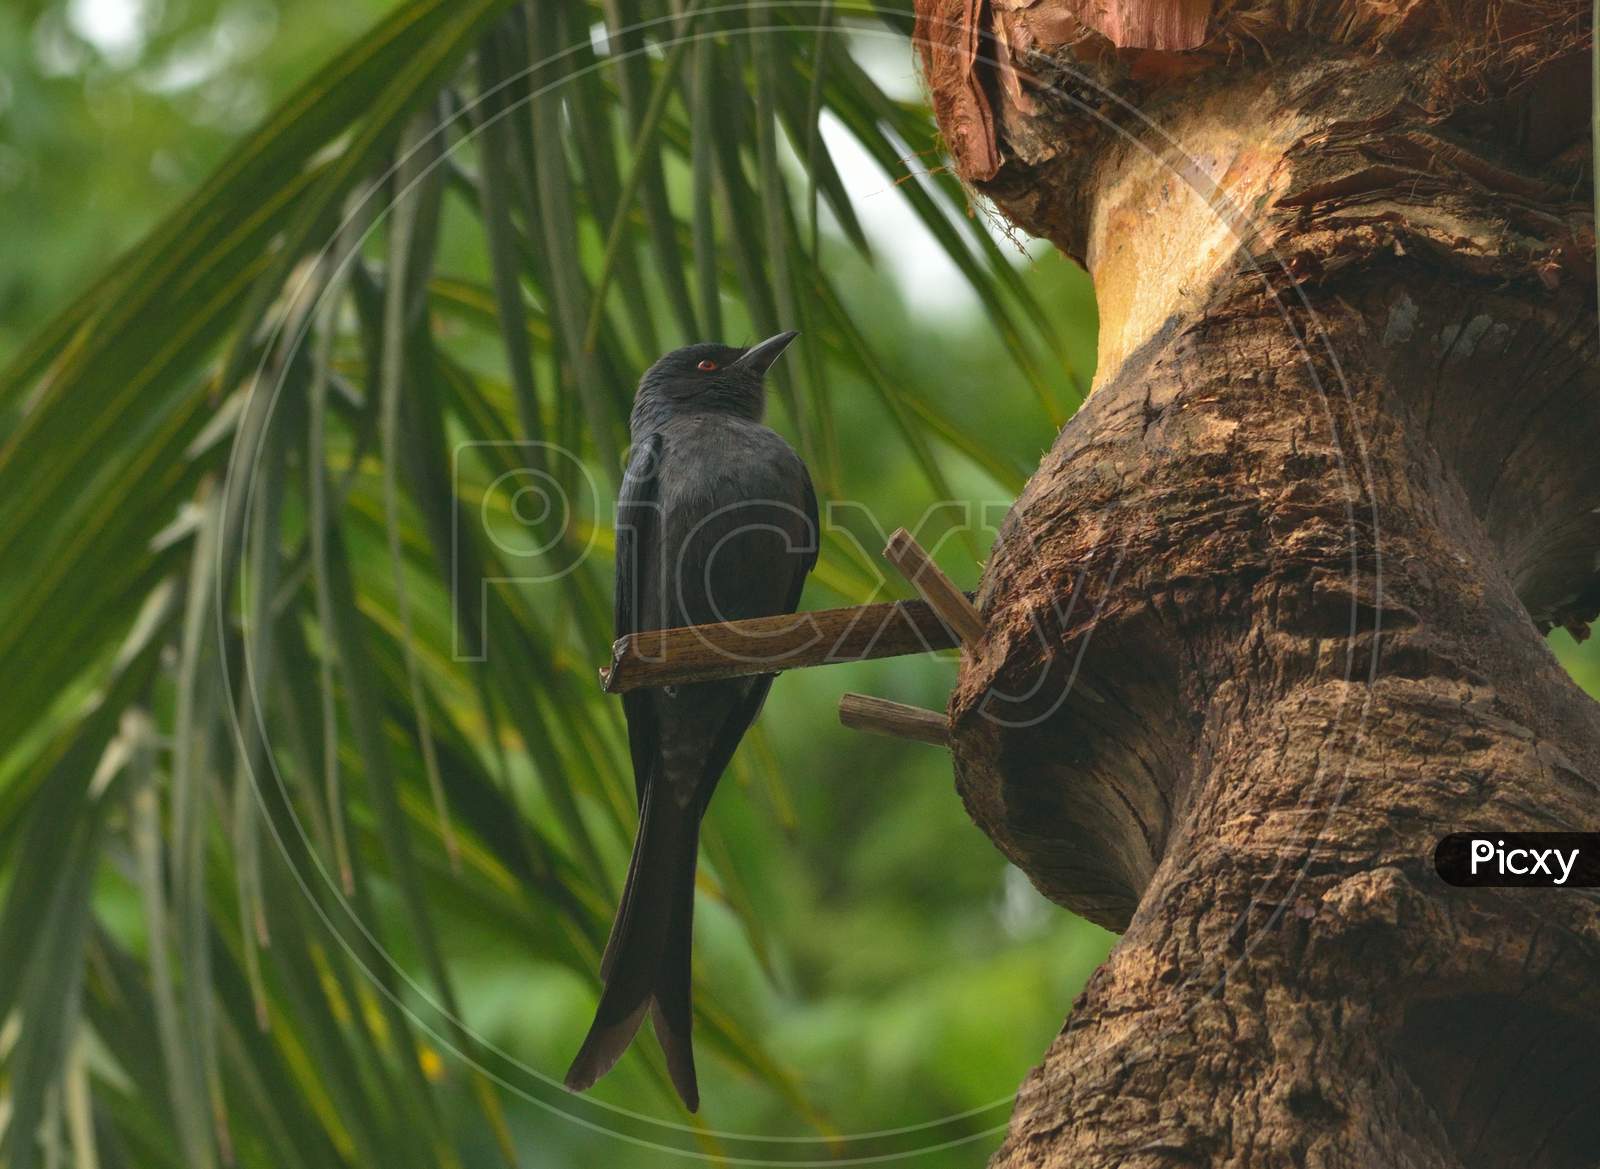 drongo bird in perch for food searching